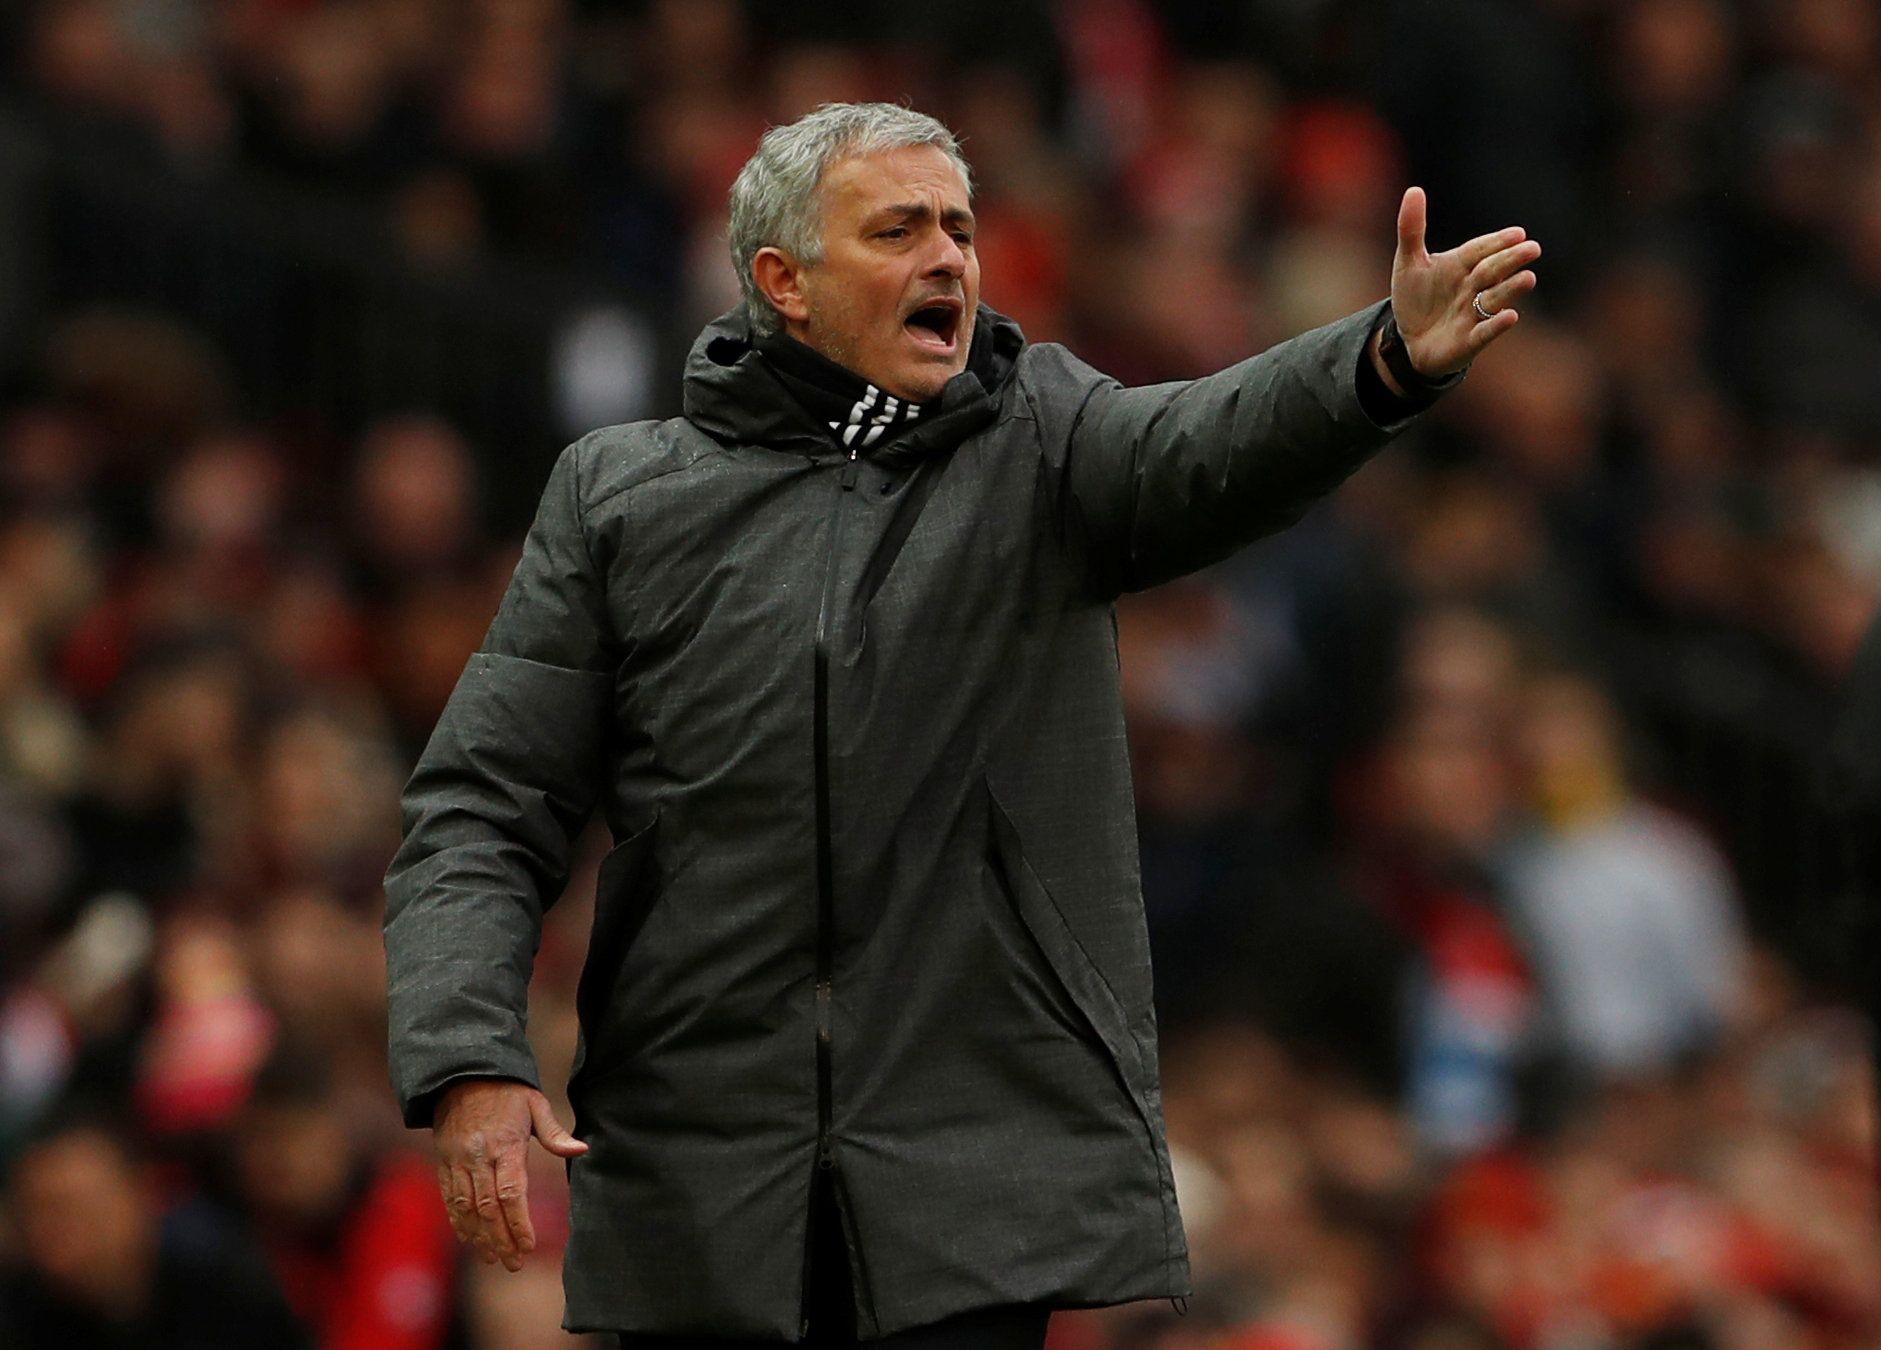 Soccer Football - Premier League - Manchester United vs Huddersfield Town - Old Trafford, Manchester, Britain - February 3, 2018   Manchester United manager Jose Mourinho reacts   Action Images via Reuters/Lee Smith    EDITORIAL USE ONLY. No use with unauthorized audio, video, data, fixture lists, club/league logos or 